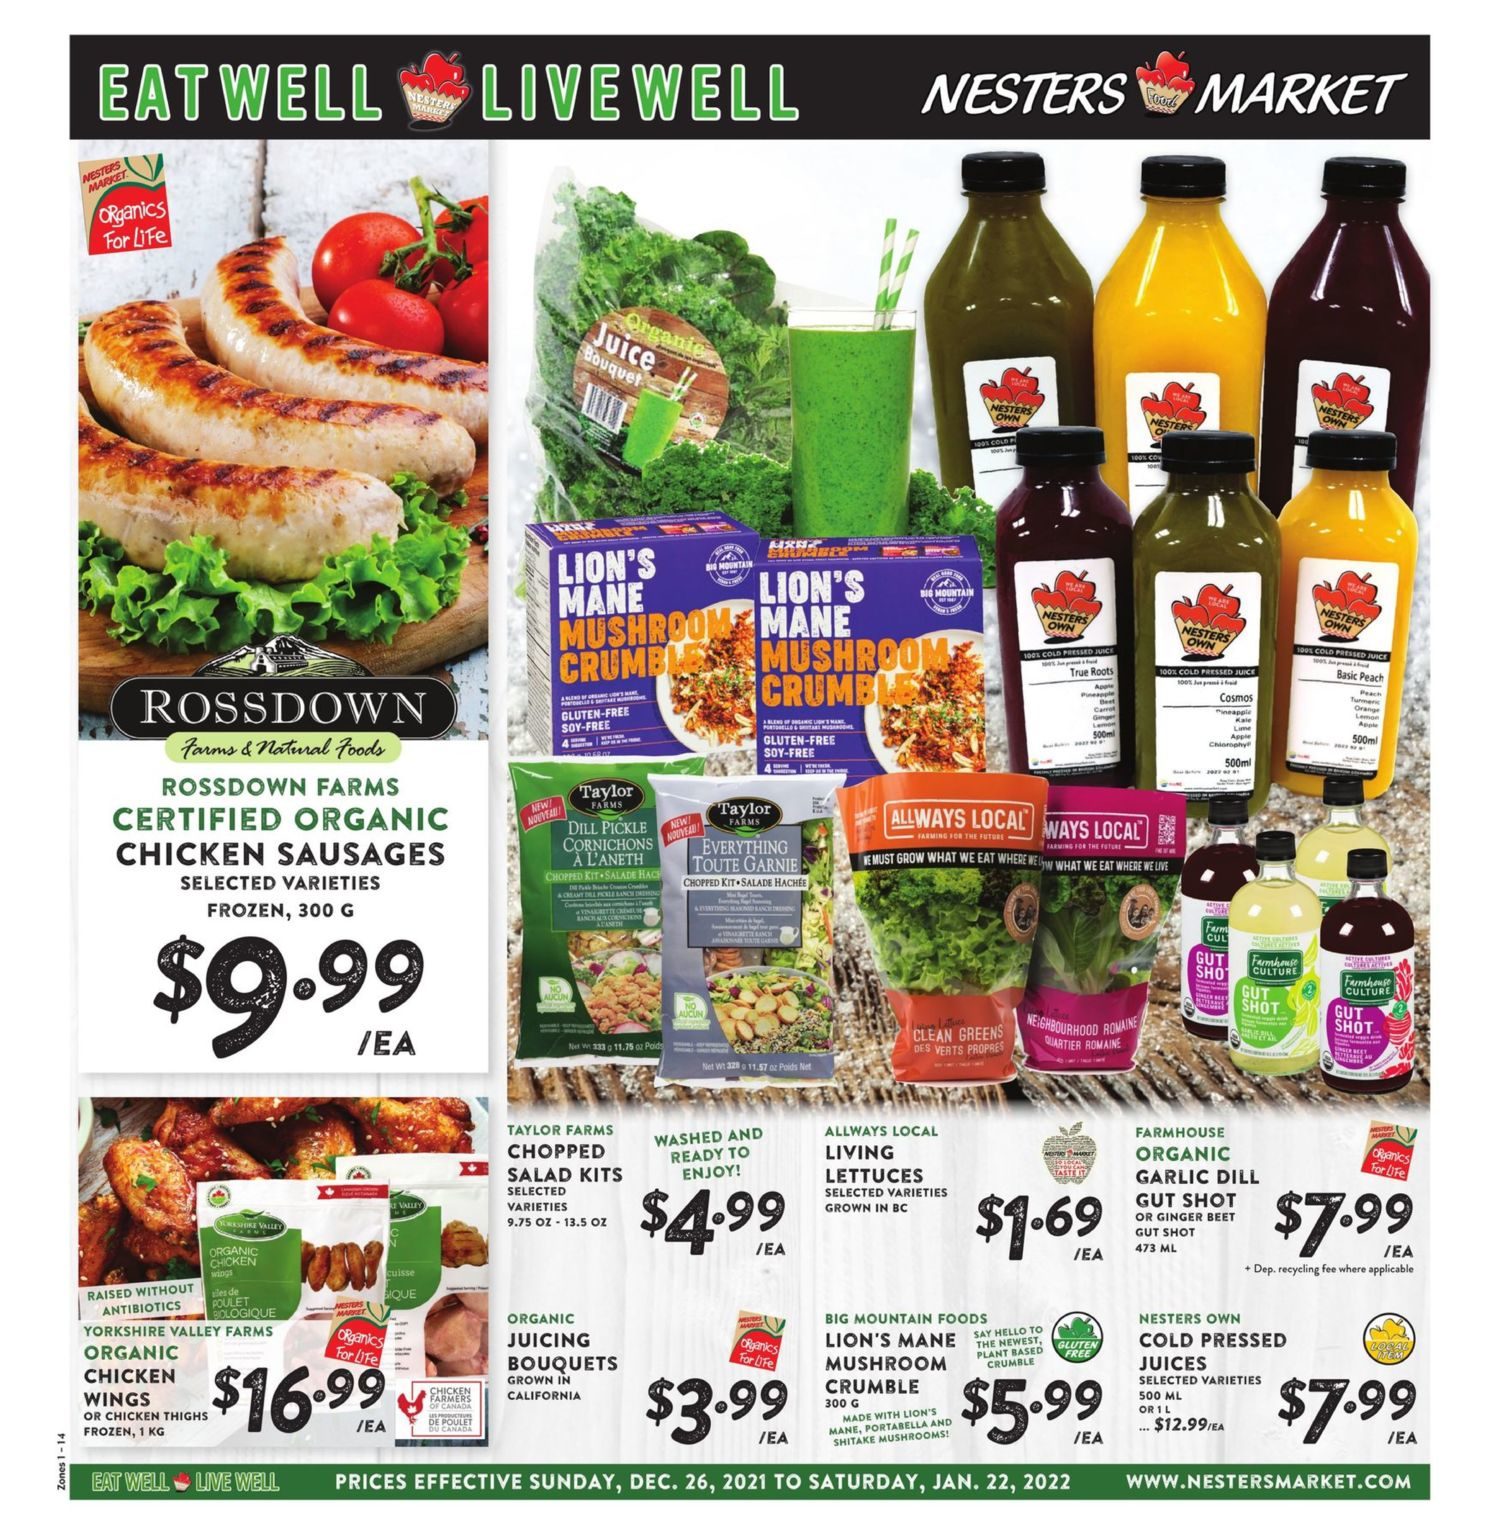 Nesters Market - Eat Well, Live Well